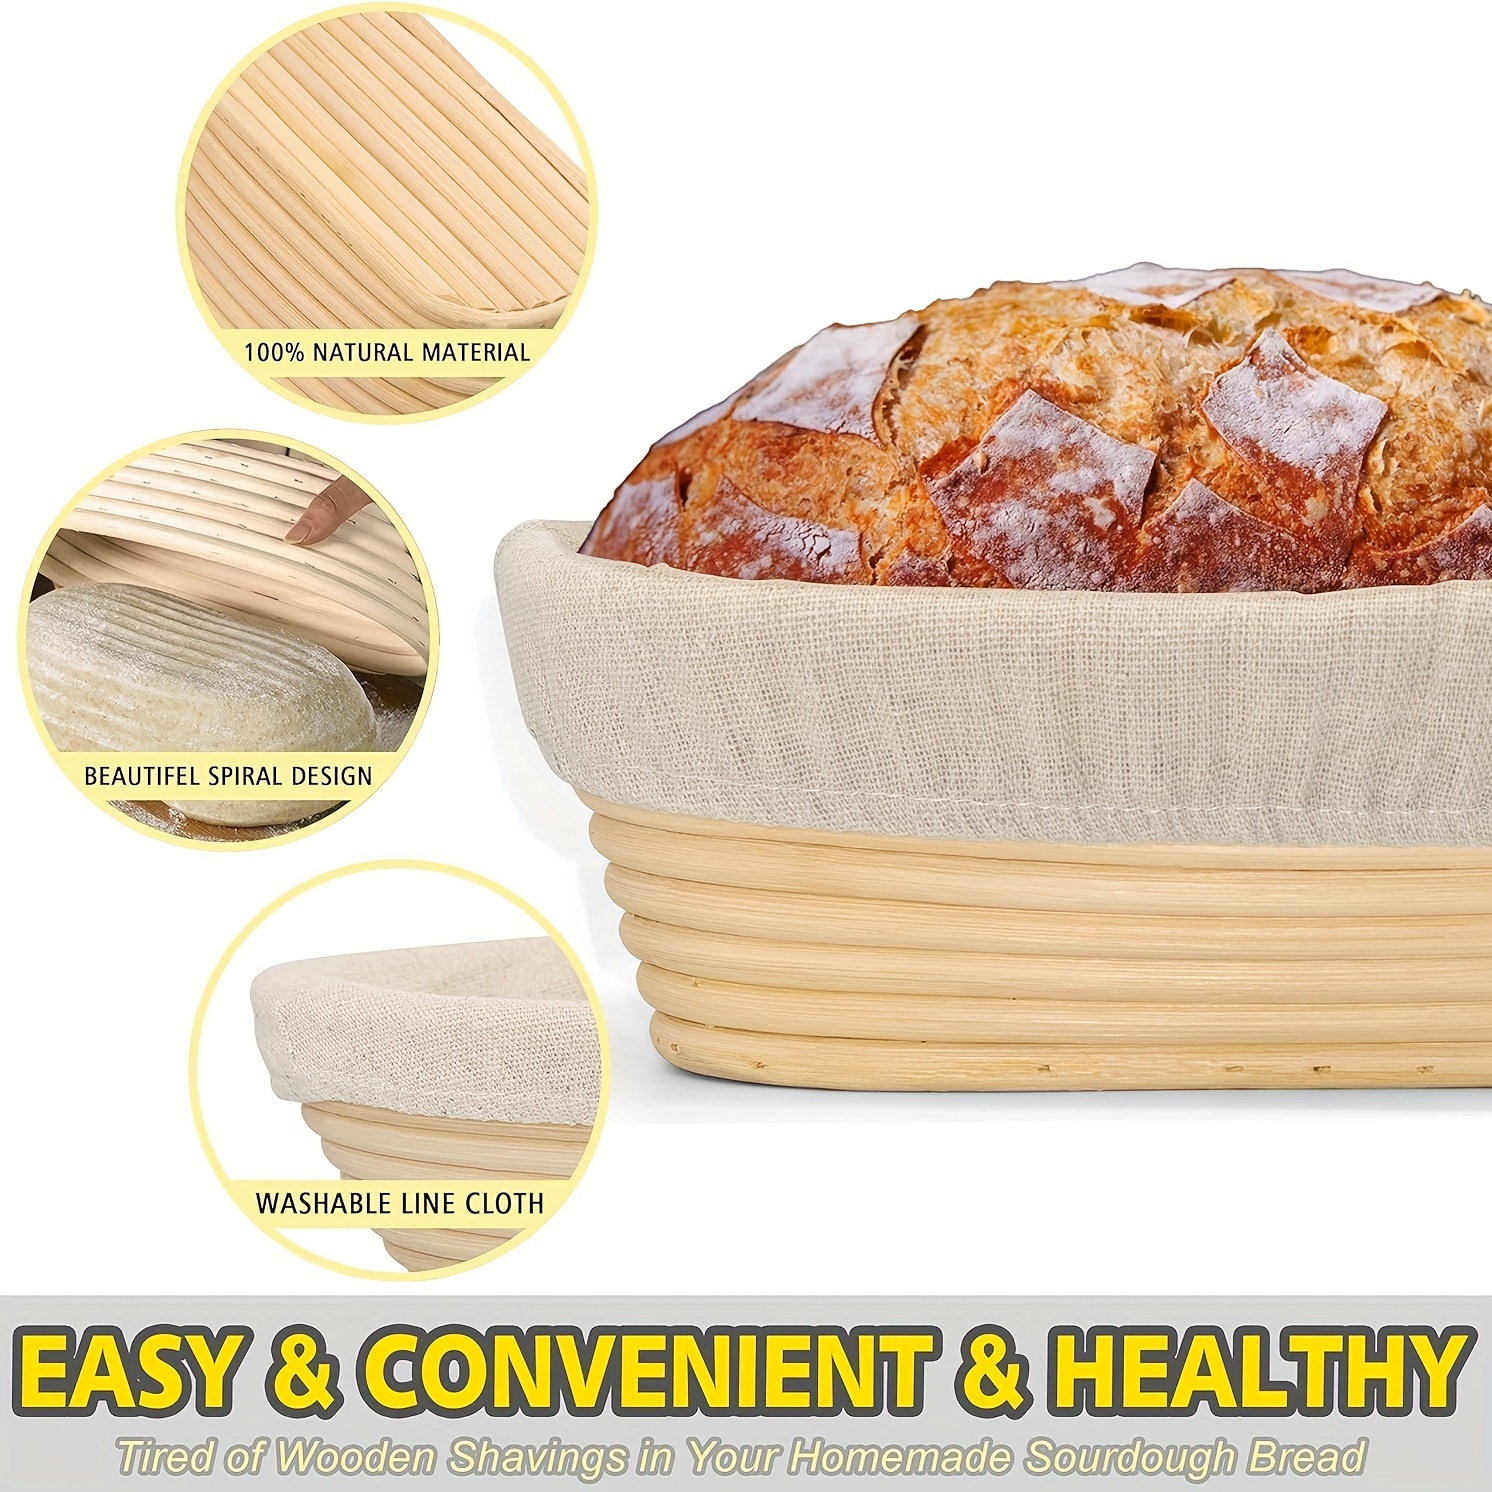 2Pcs Oval Bread Proofing Proving Basket Silicone Banneton Brotform